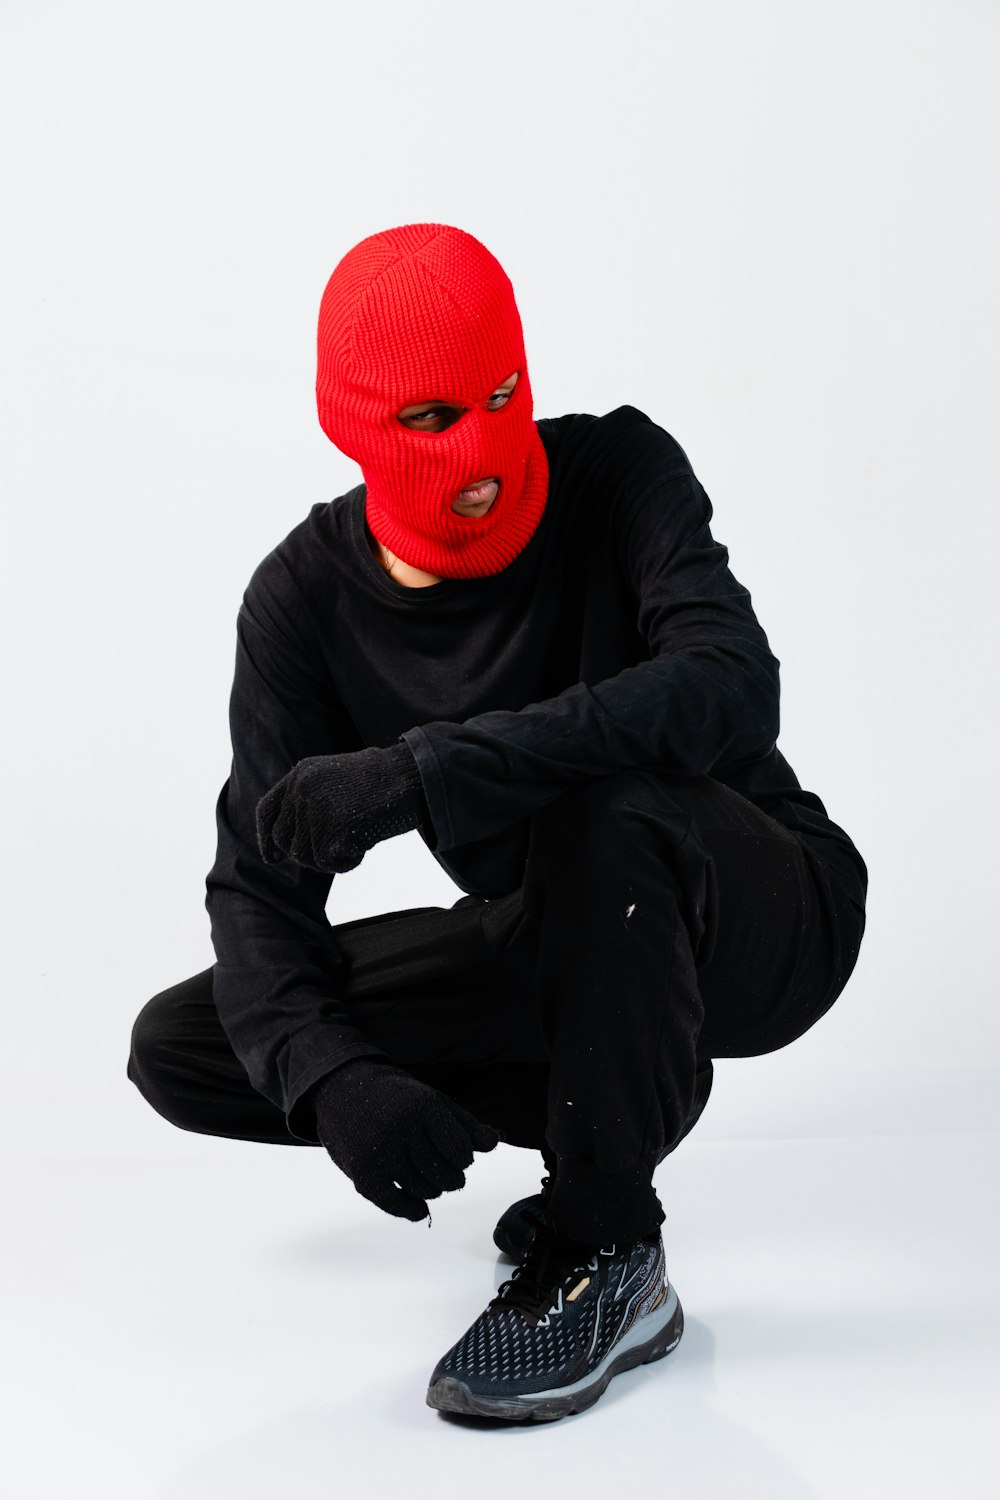 a man in a red mask squatting on a white background